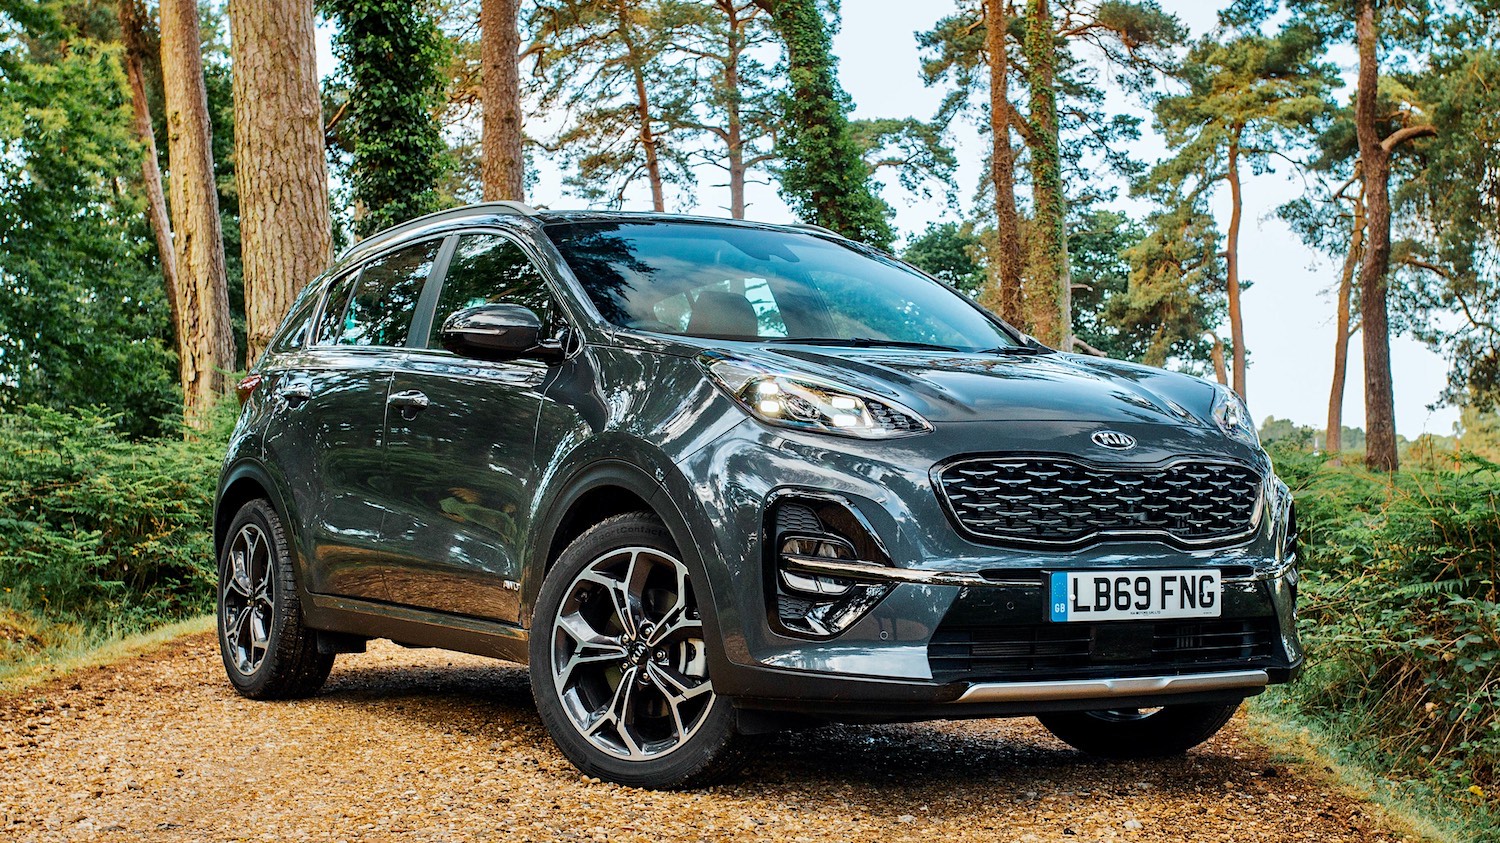 Drive Co Uk Reviewed Kia Sportage Gt Line S Punches Above Its Price